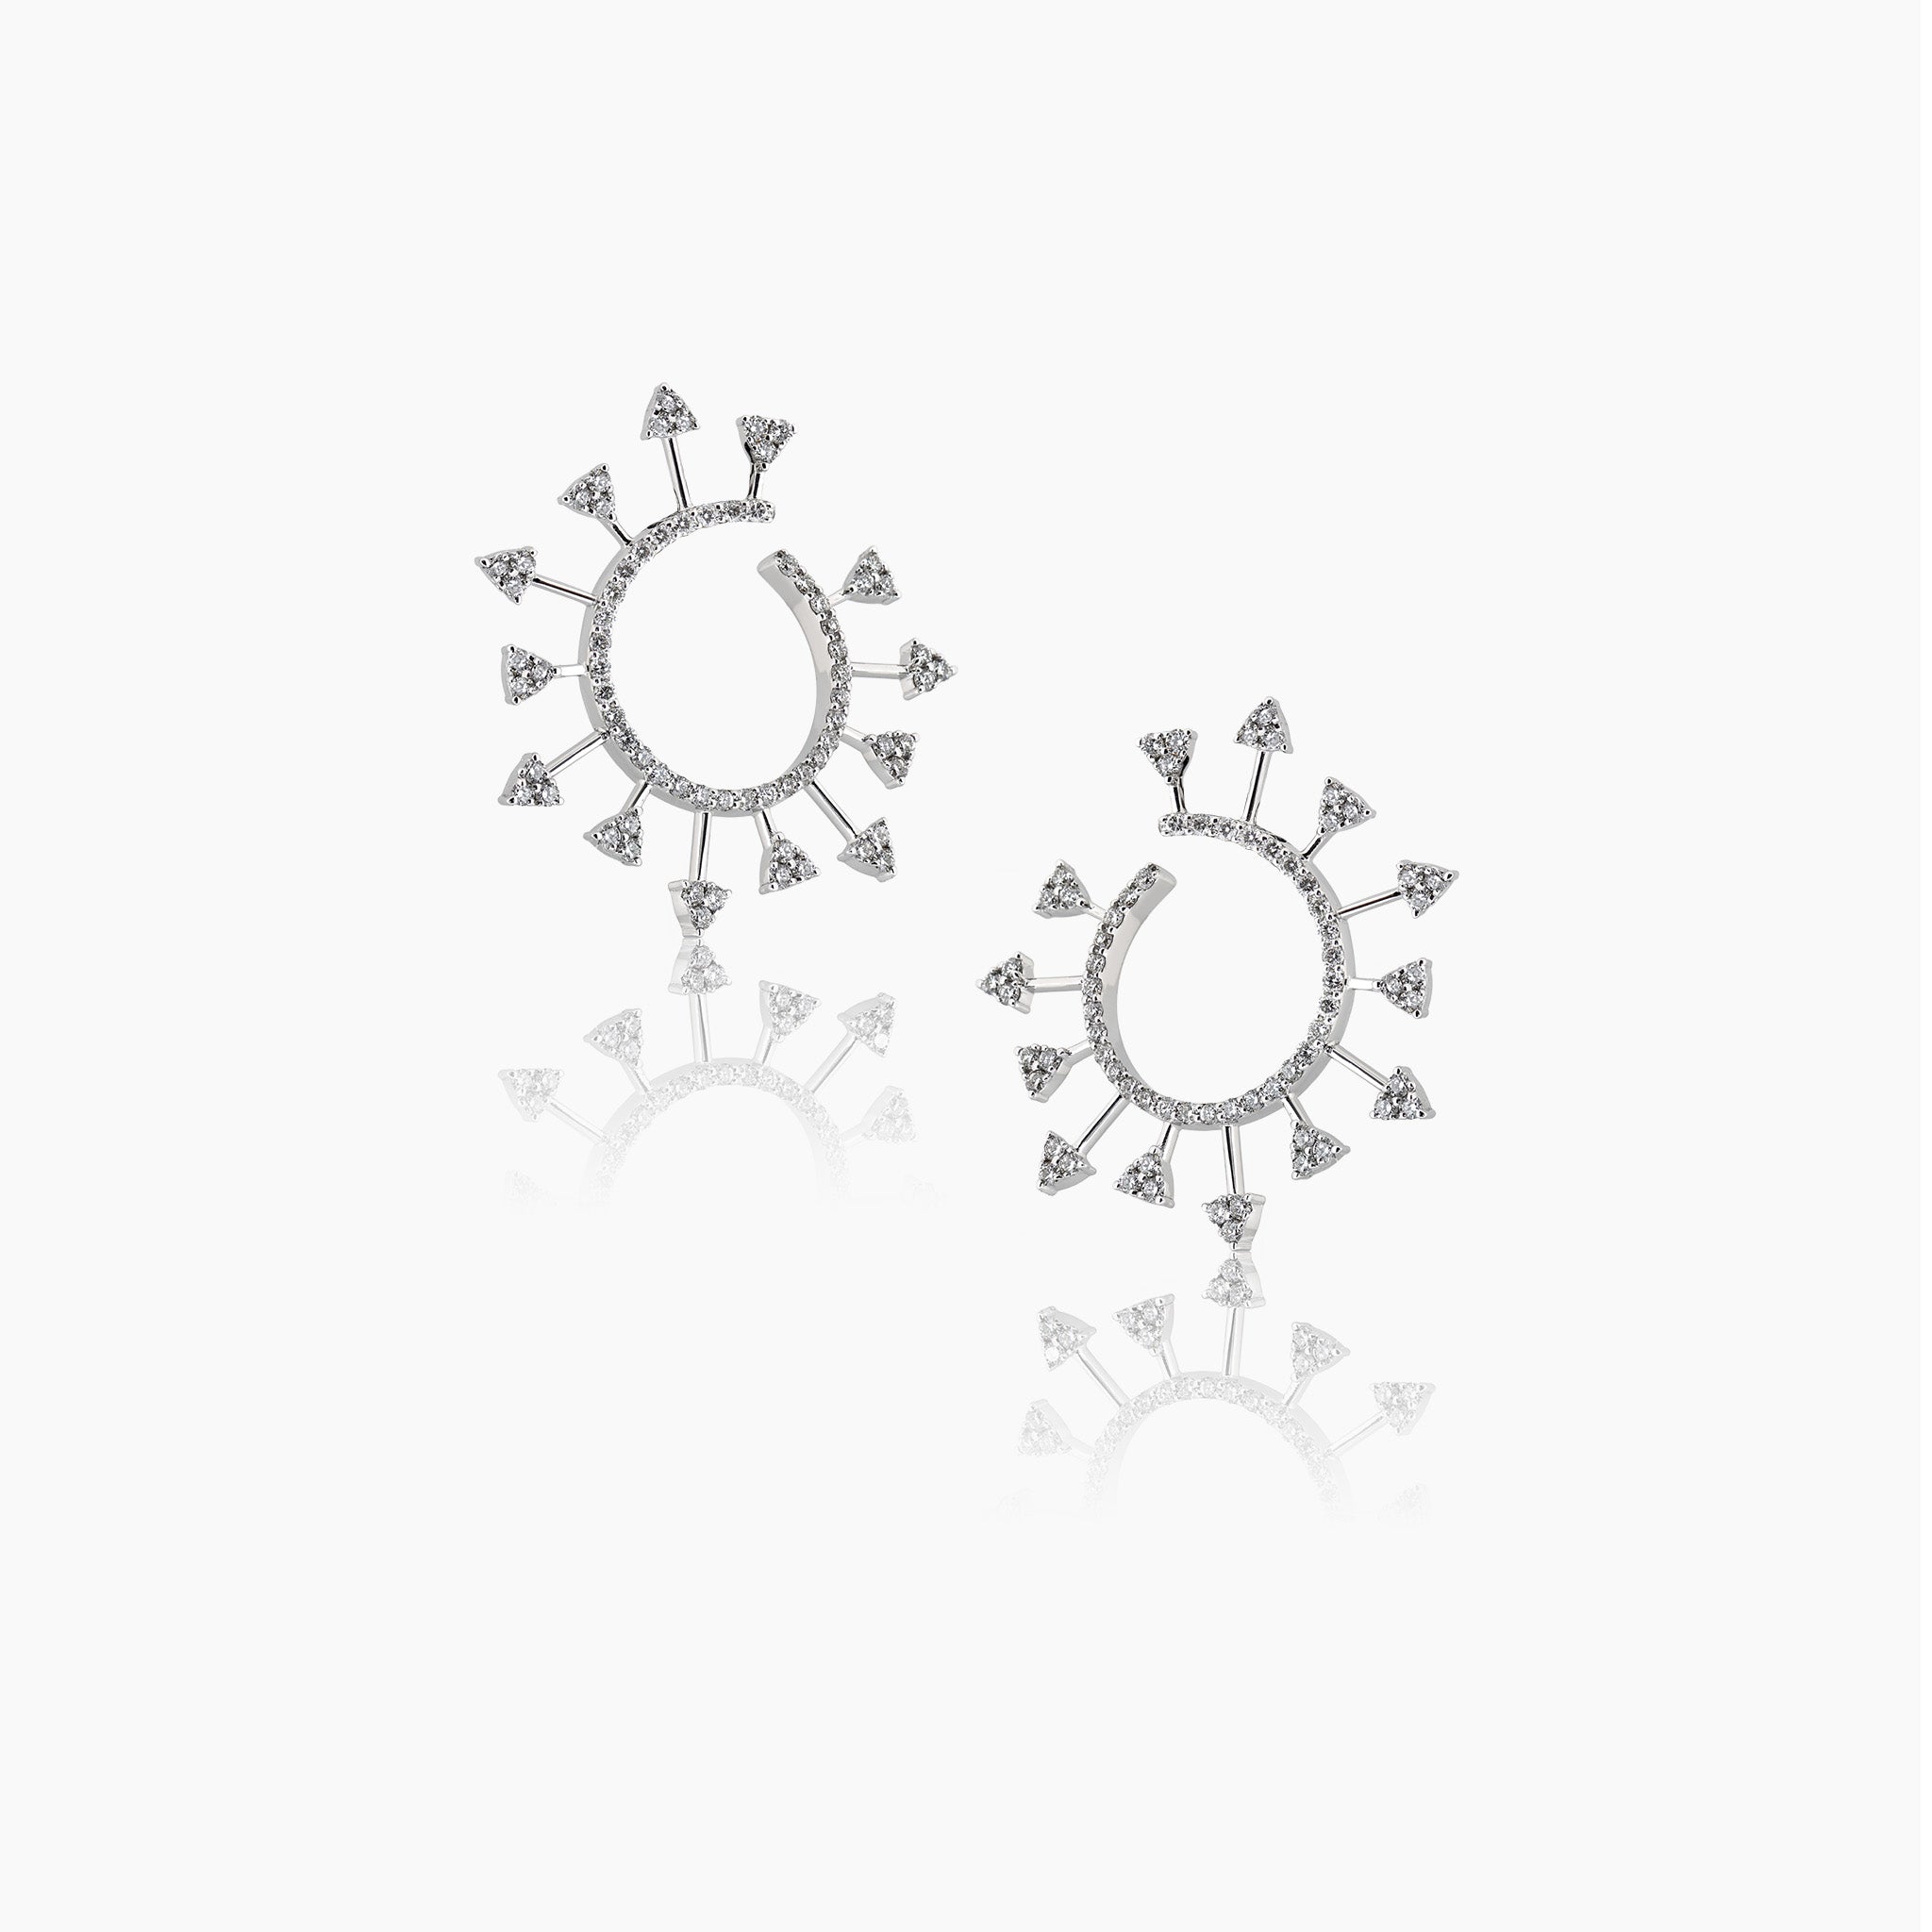 White gold diamond spiral earrings against a clean off-white background